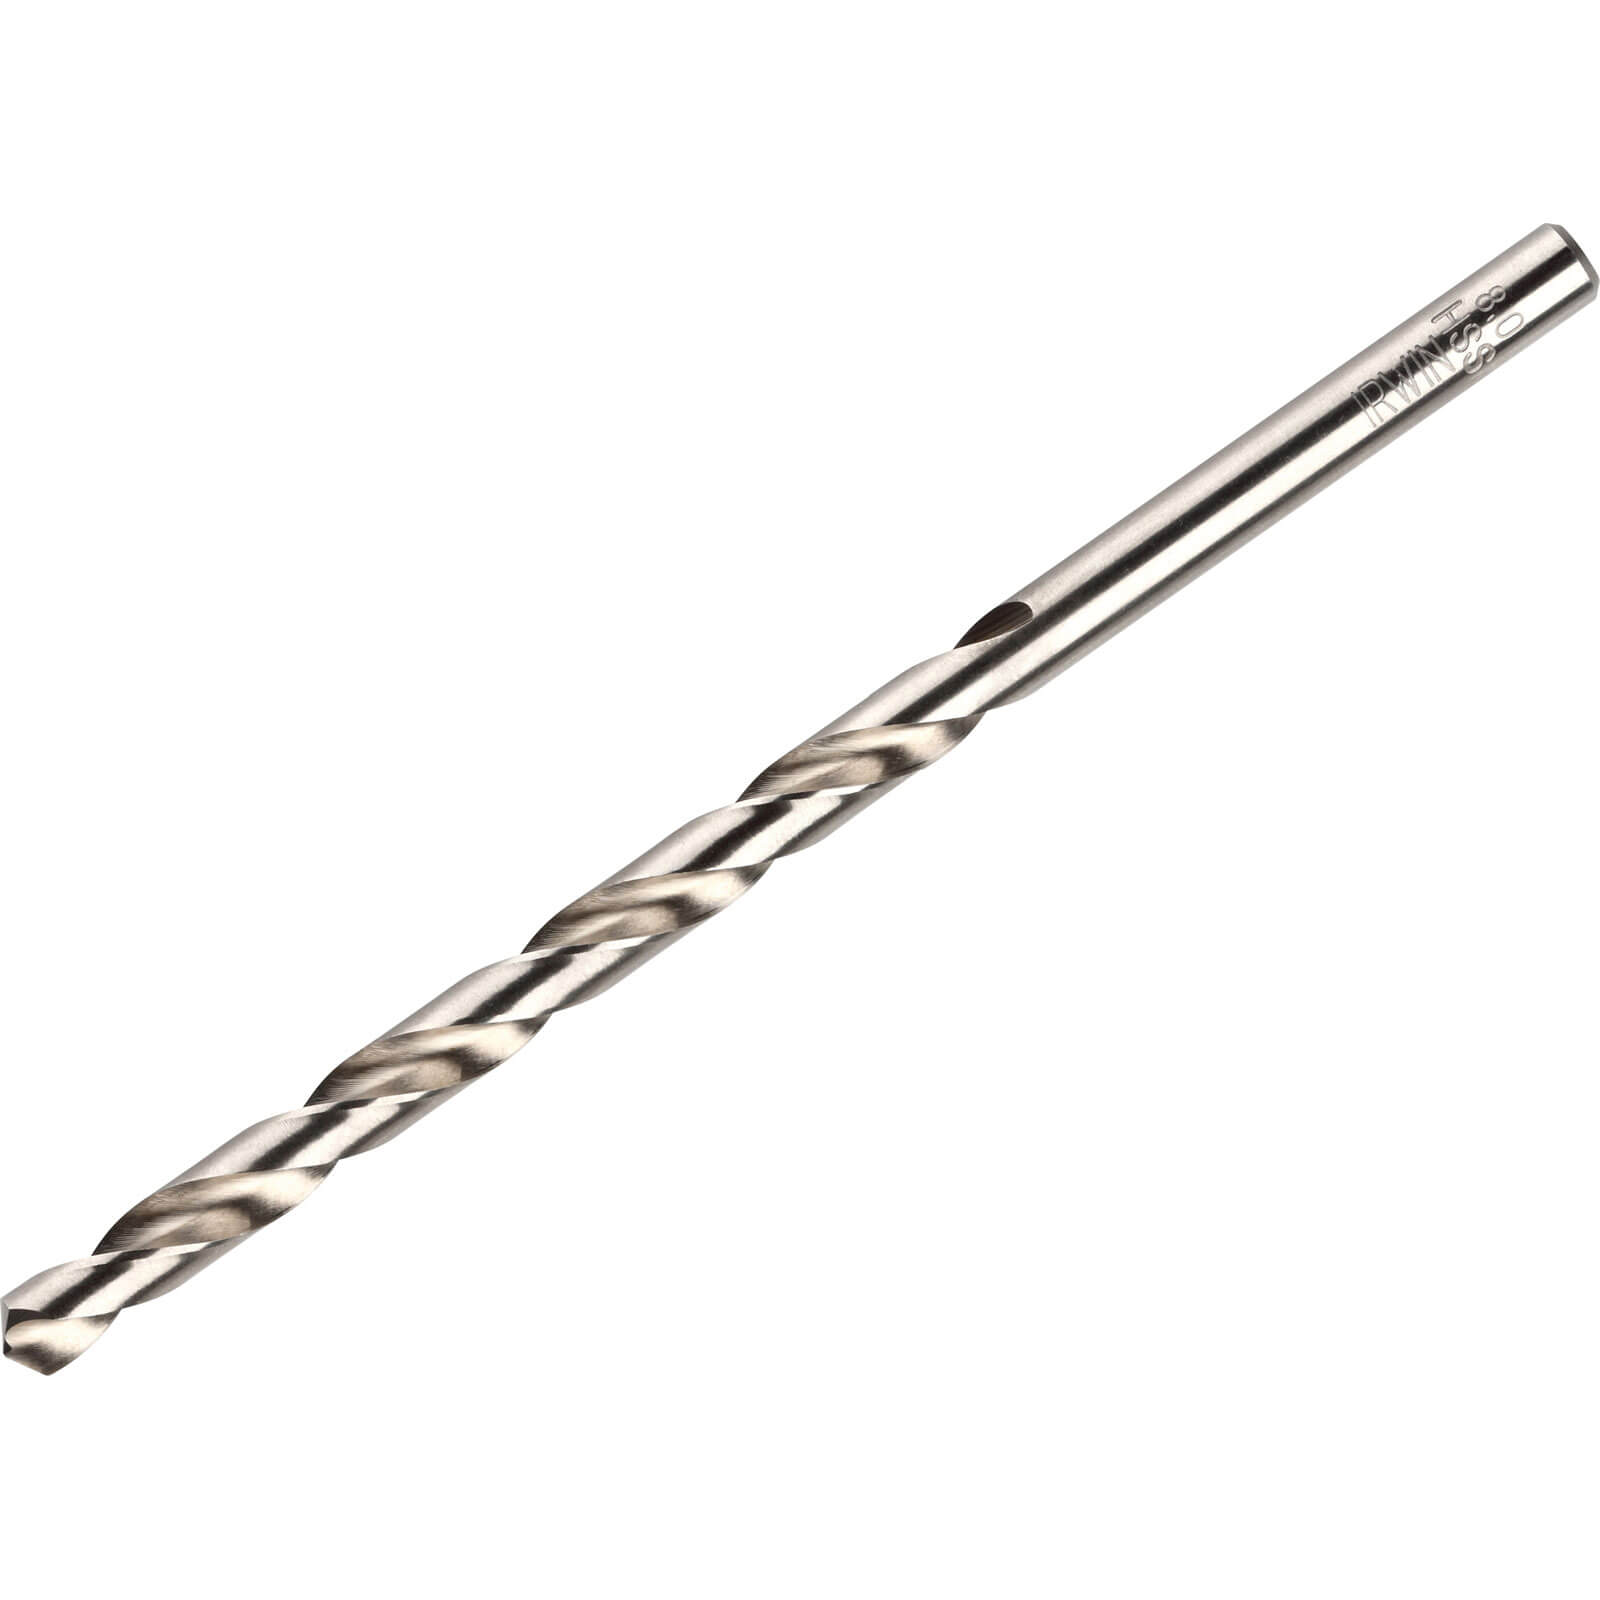 Photo of Irwin Hss Pro Drill Bits 8.5mm Pack Of 1